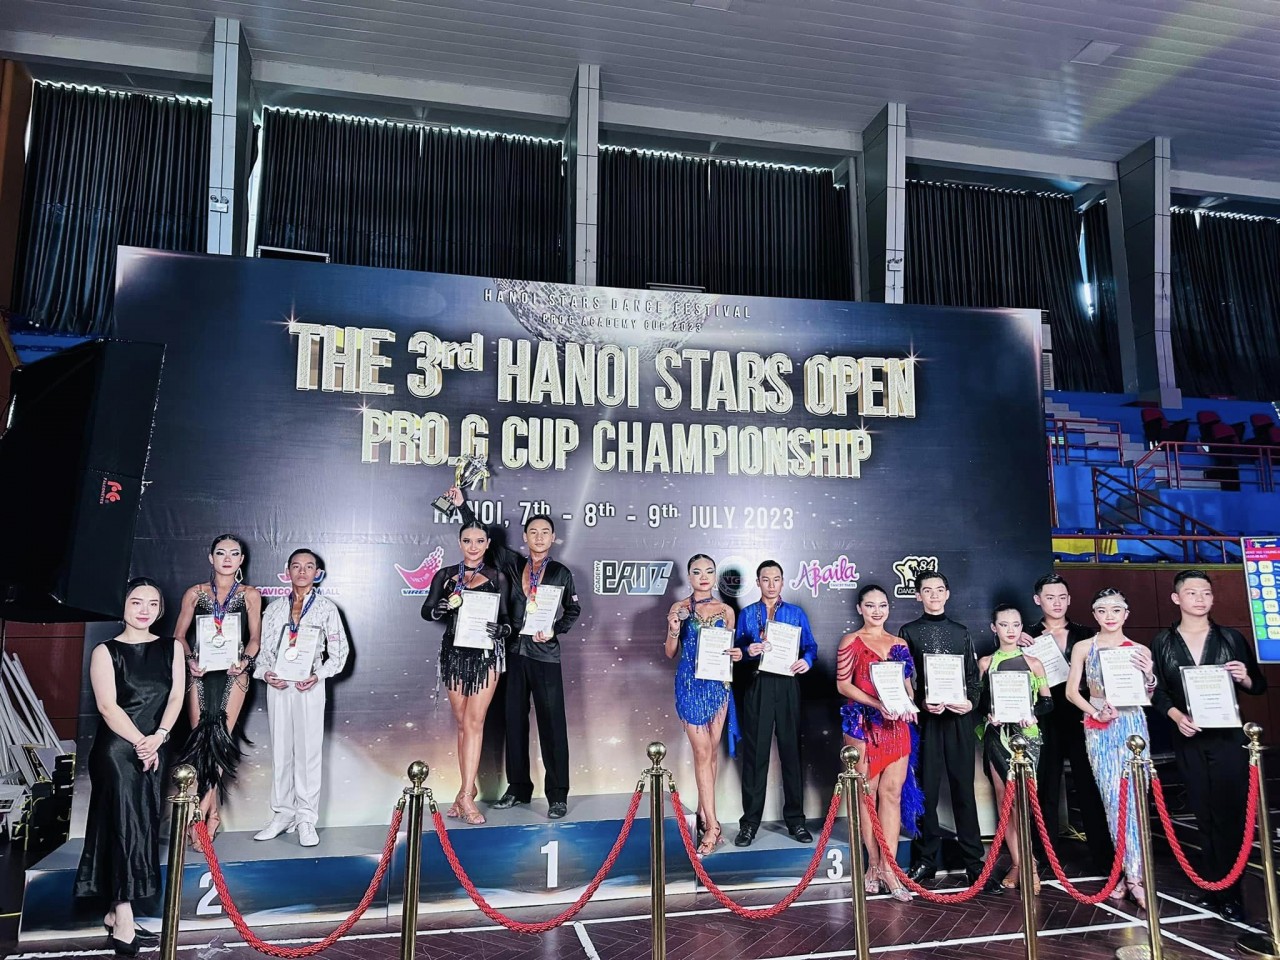 2000 Dancers Gather in Hanoi to Join Int'l Dancing Contests